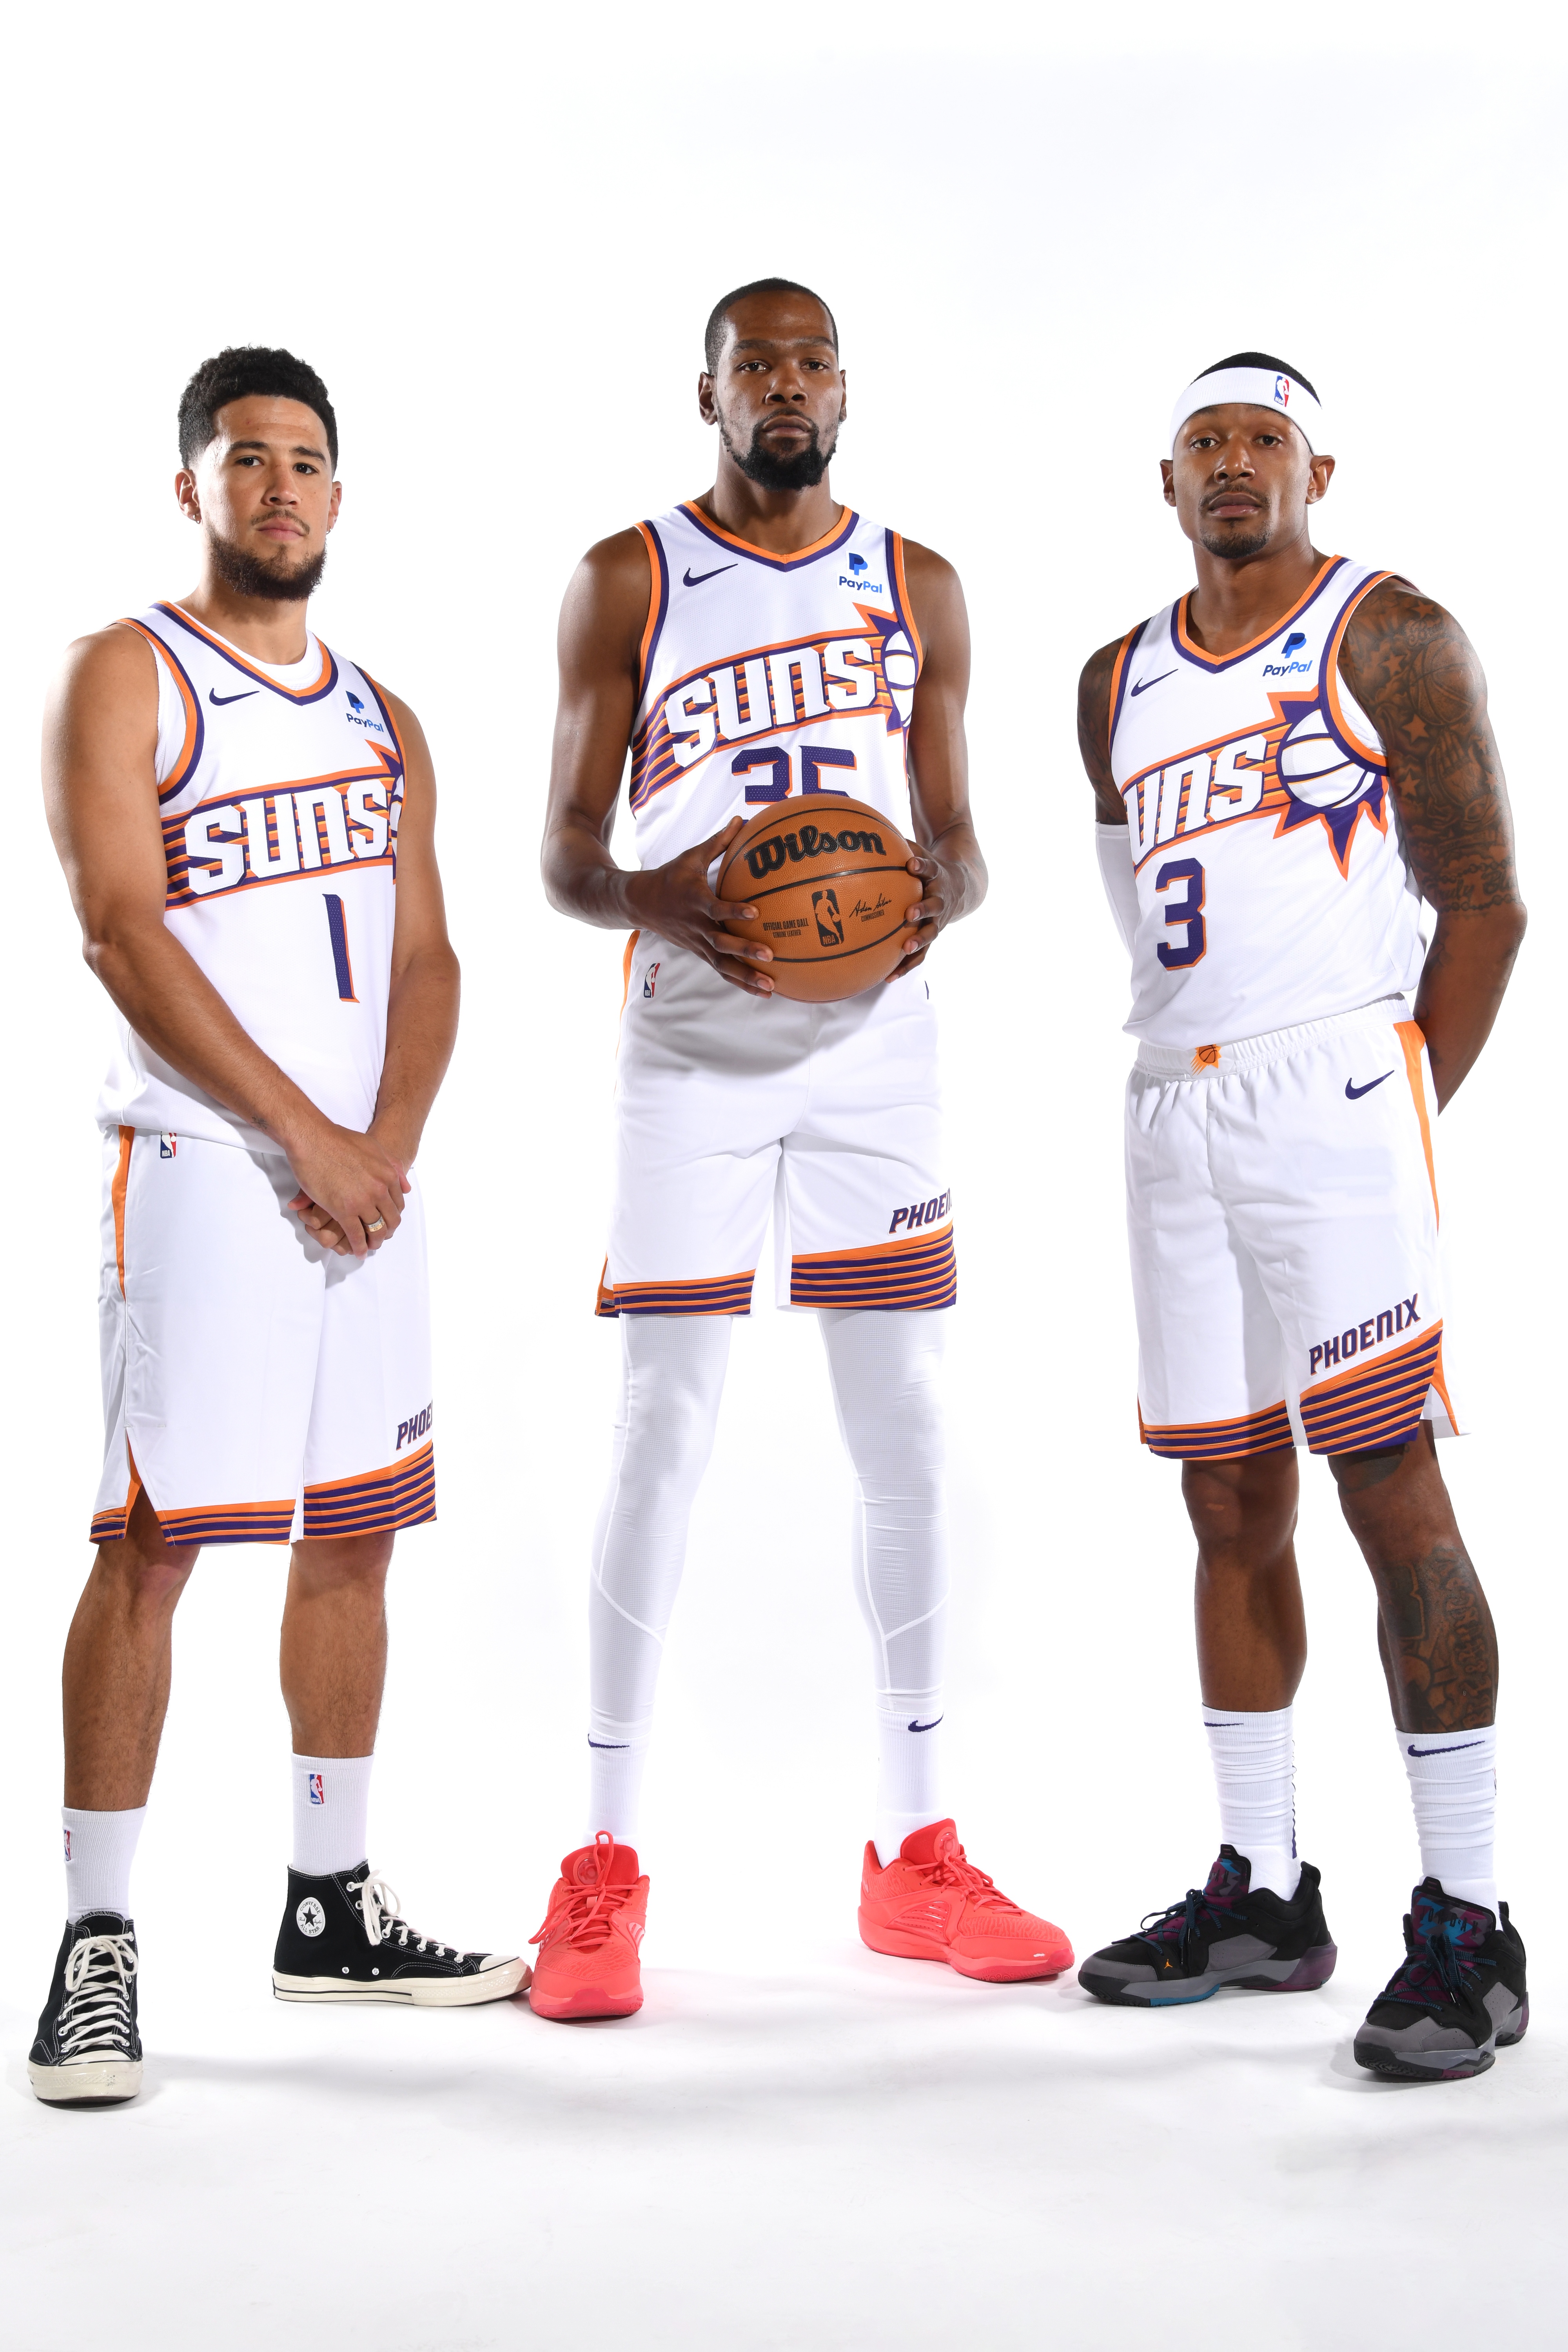 Three Phoenix Suns players standing side by side in white basketball uniforms